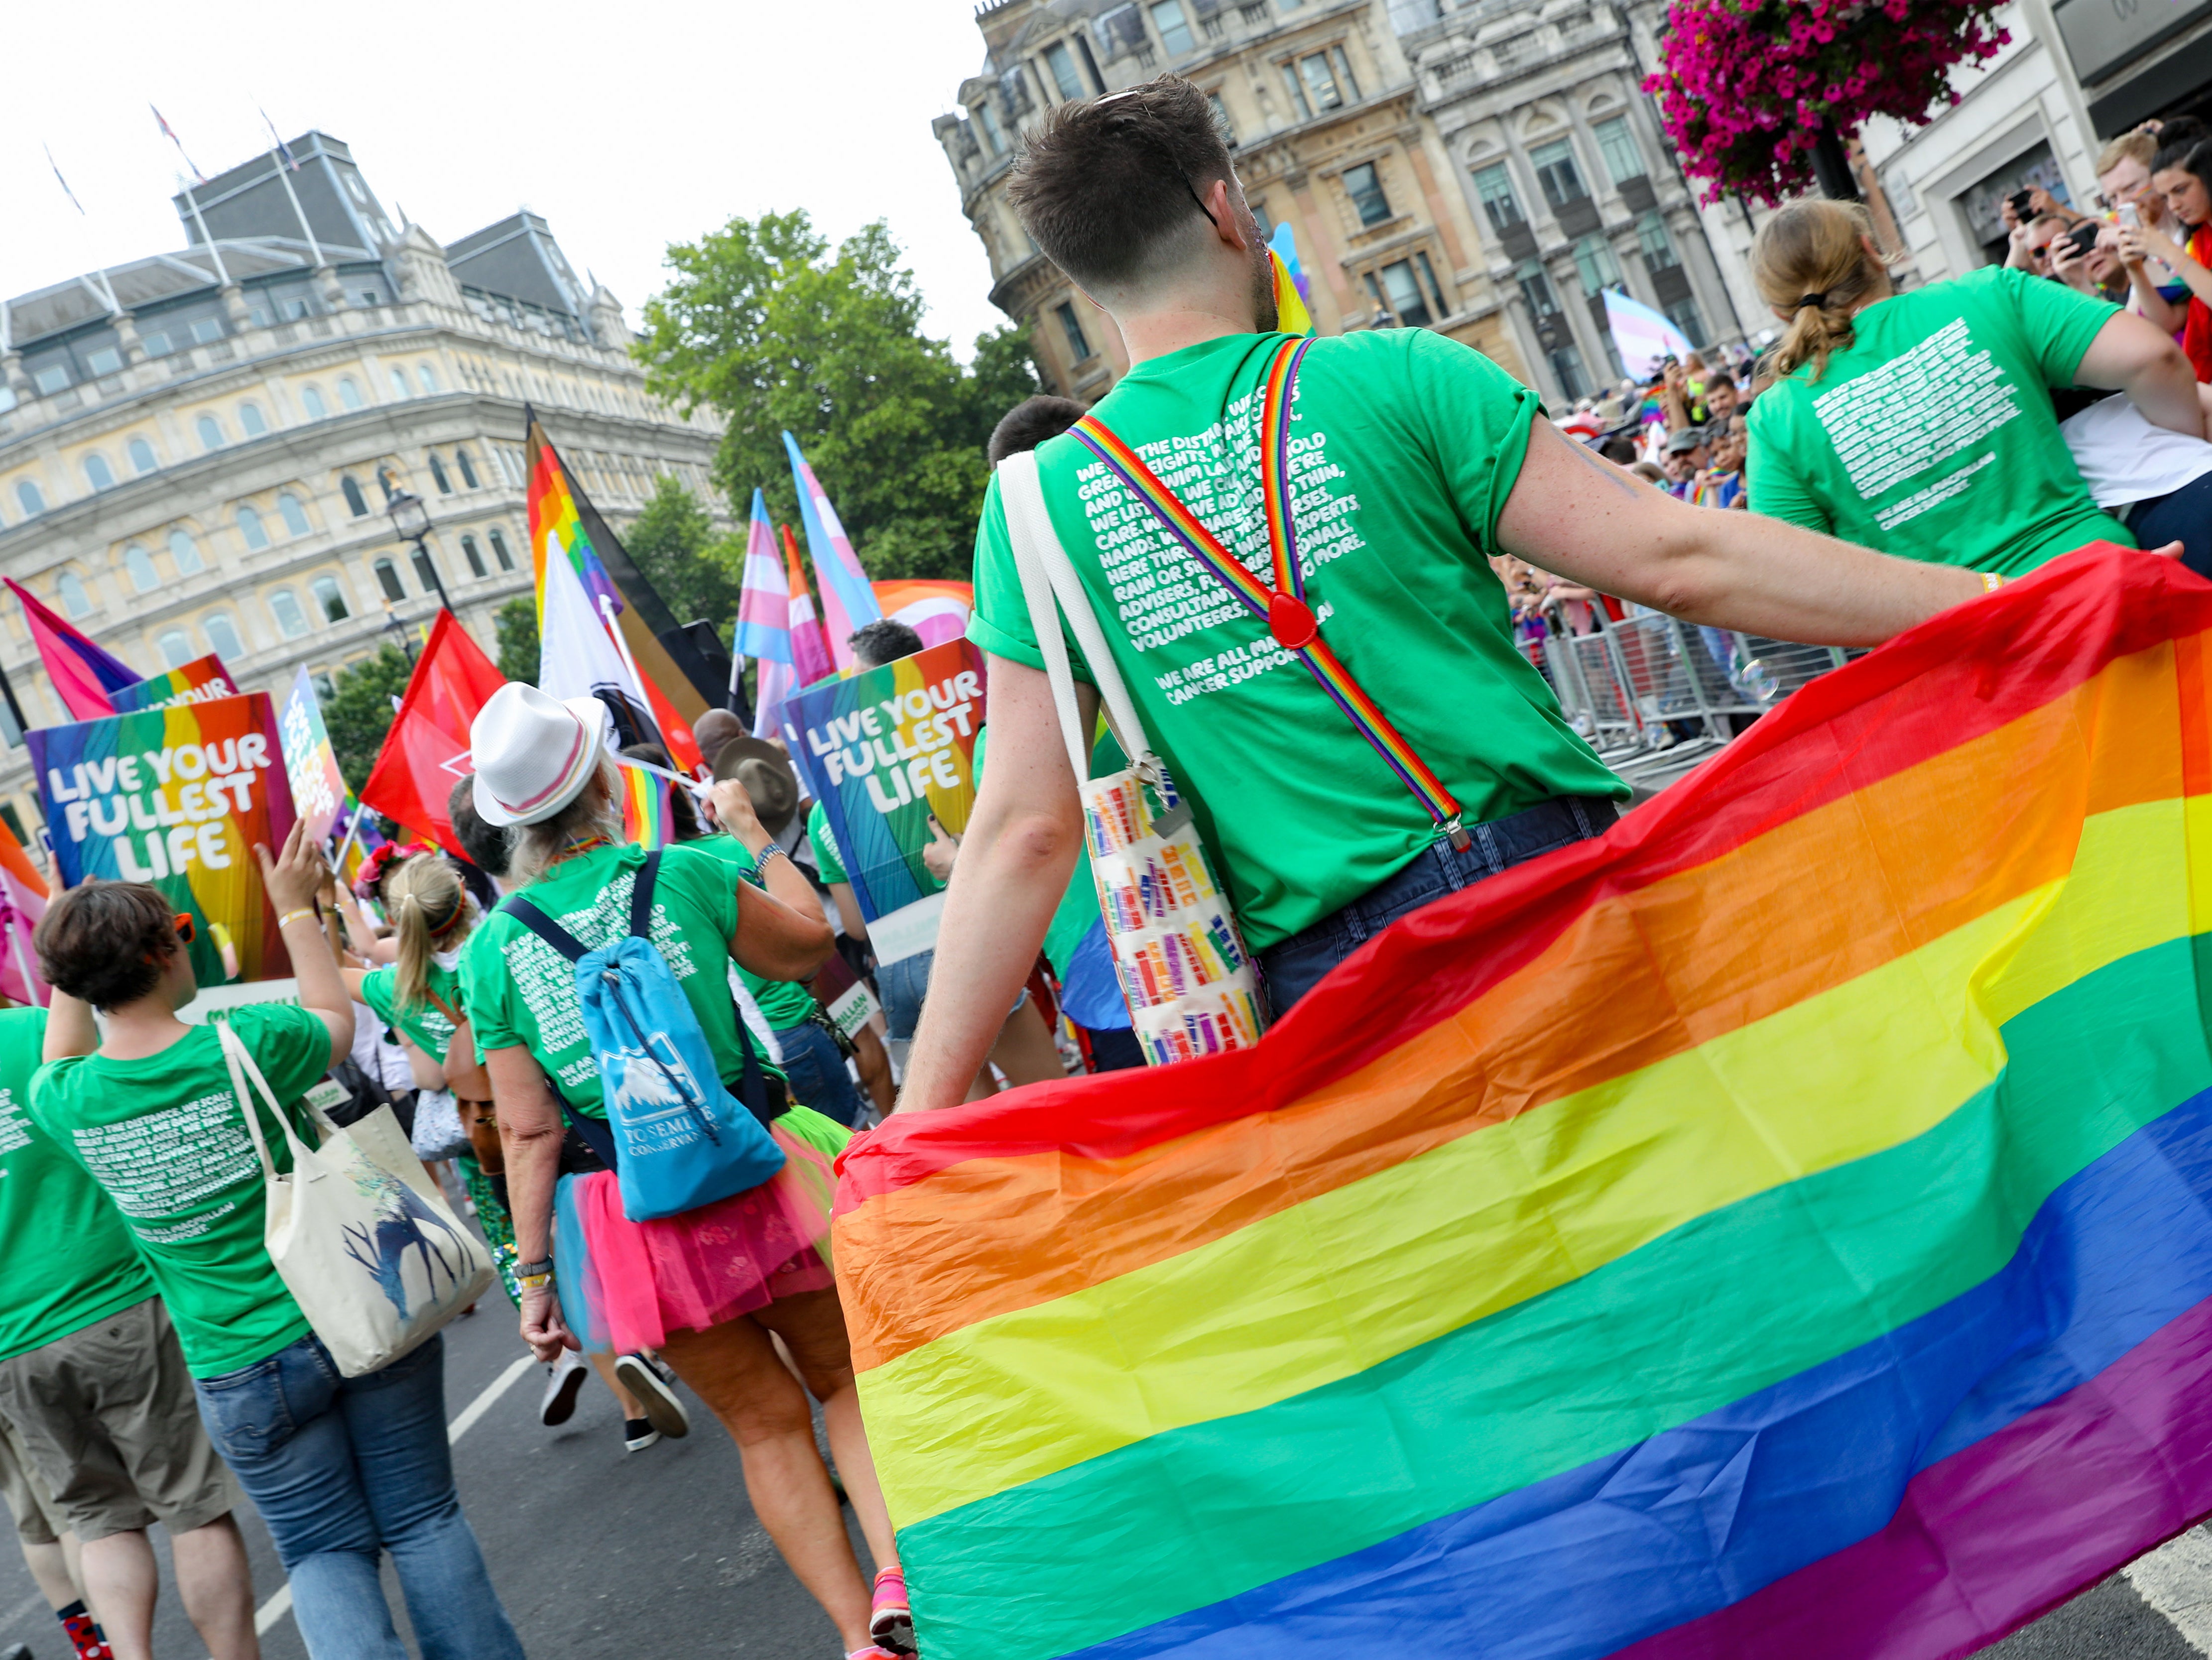 Parade goers during Pride in London 2019